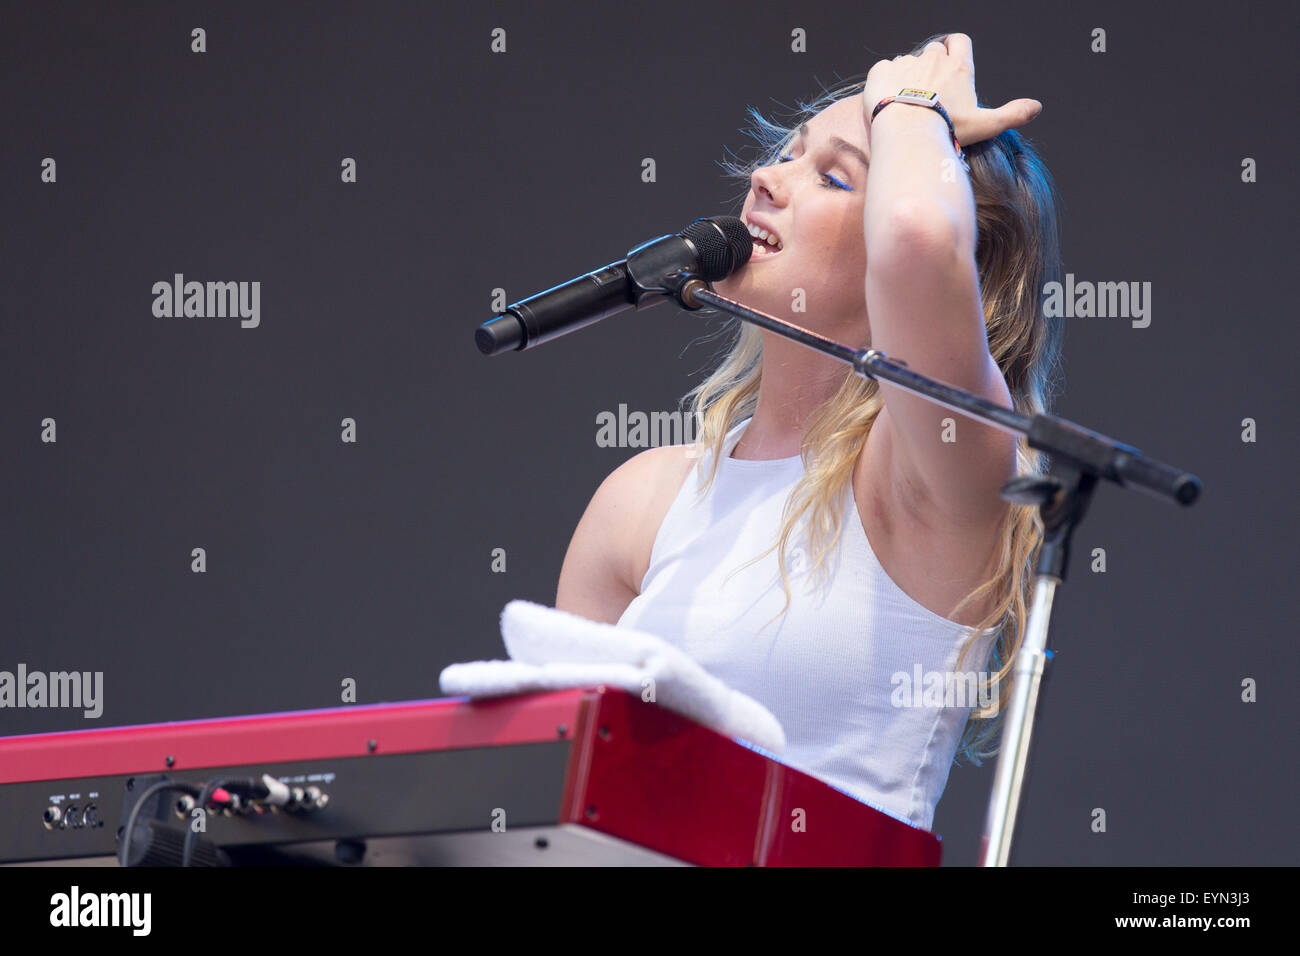 Chicago, Illinois, USA. 31st July, 2015. Singer GEORGIA NOTT of Broods performs live in Grant Park at the Lollapalooza Music Festival in Chicago, Illinois © Daniel DeSlover/ZUMA Wire/Alamy Live News Stock Photo